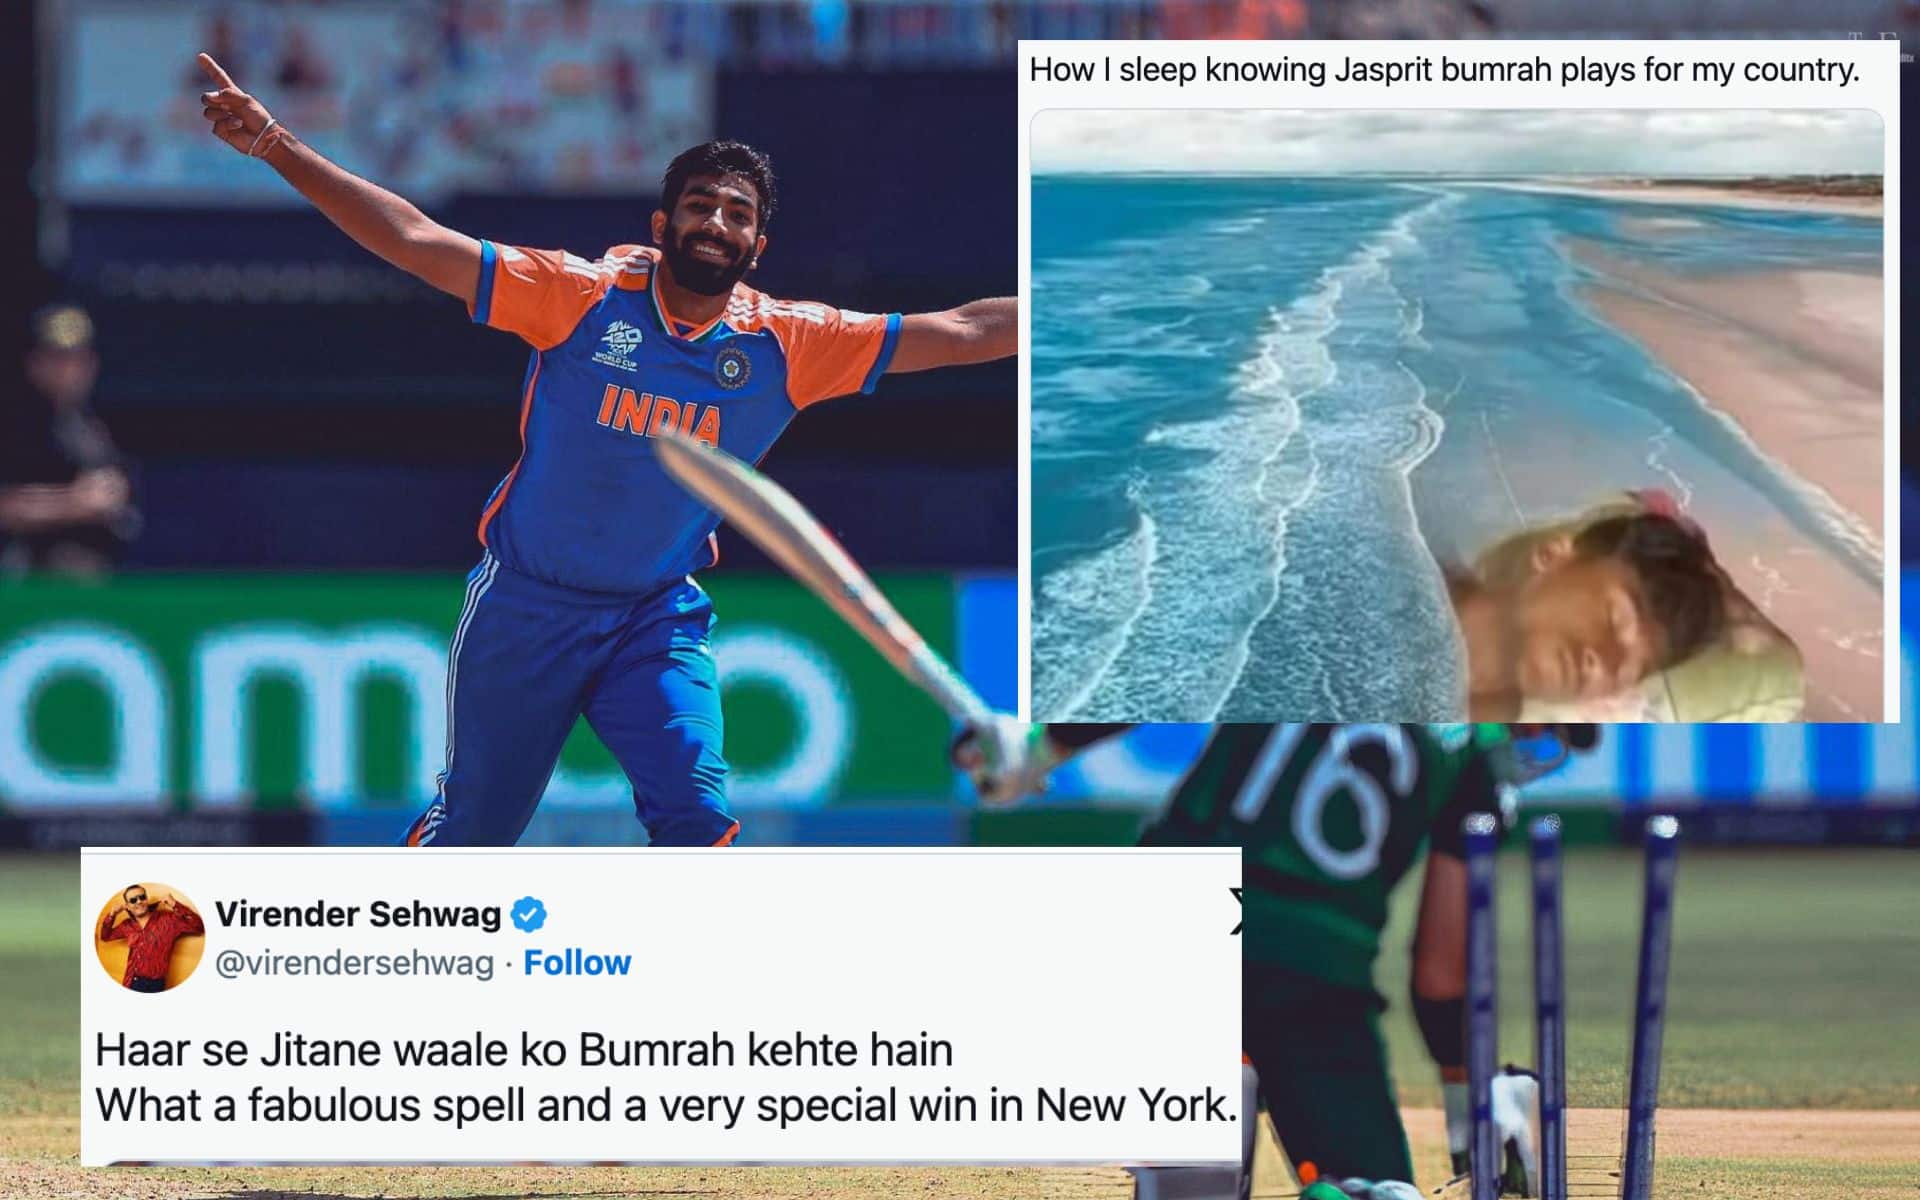 'Preserve Him': Twitter Goes Crazy After Bumrah's 'Magical Spell' Helps IND Beat PAK In T20 WC